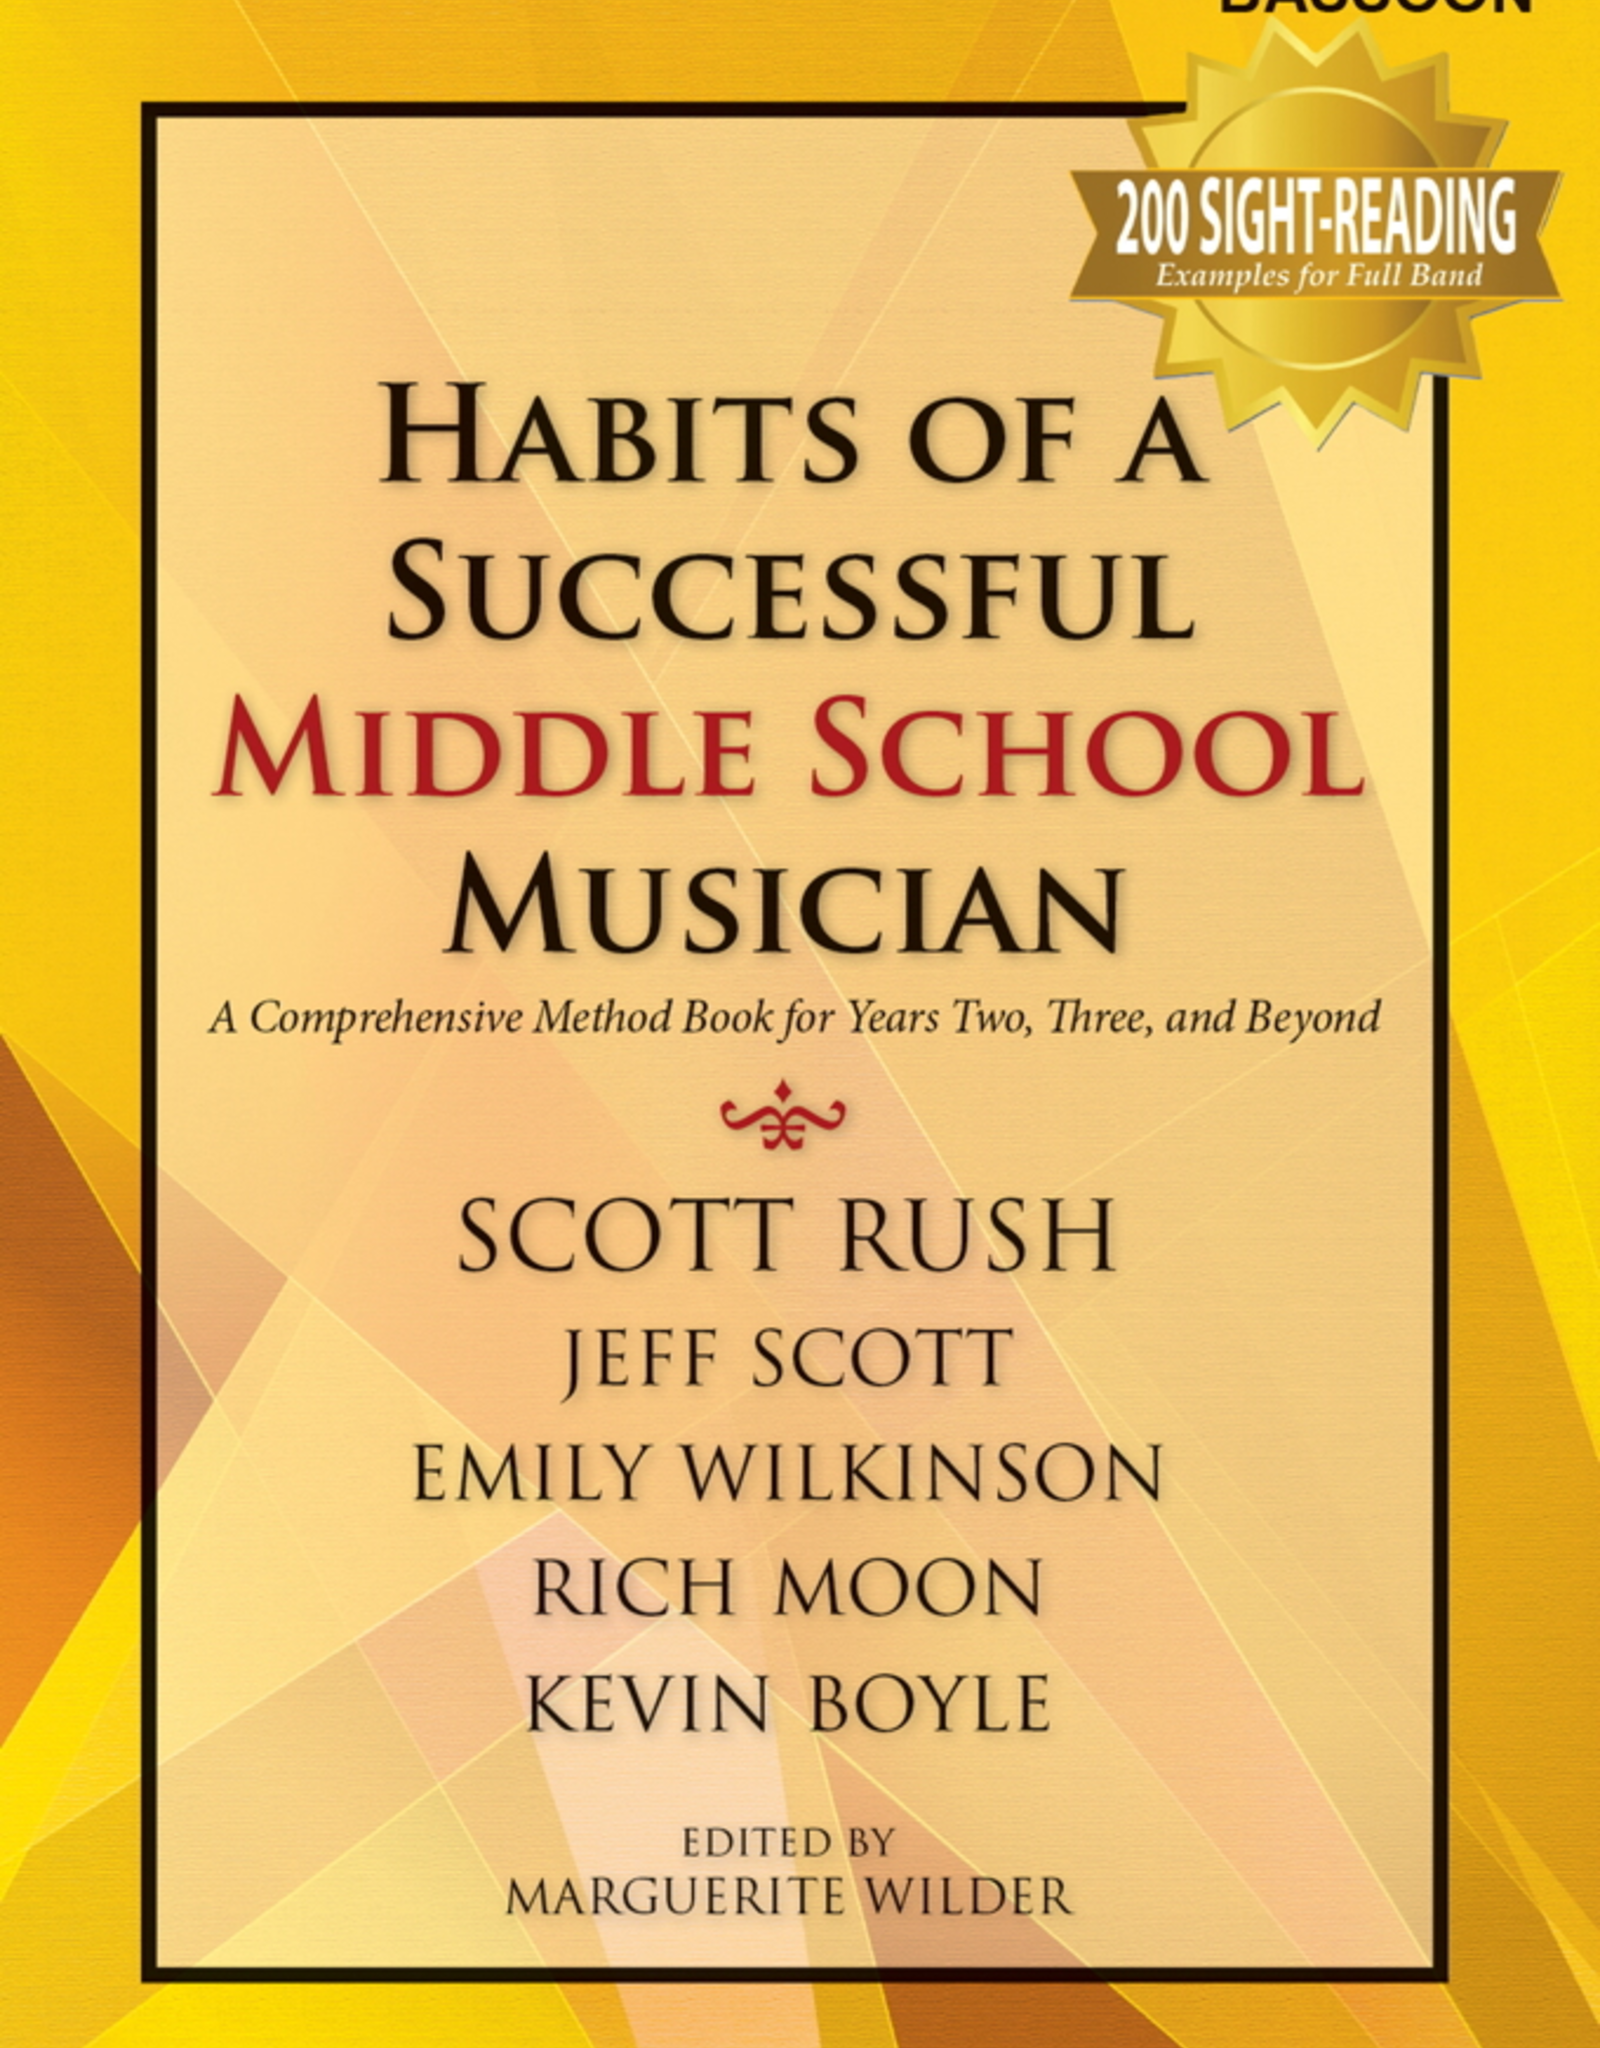 GIA Publications Habits of a Successful Middle School Musician-Bassoon